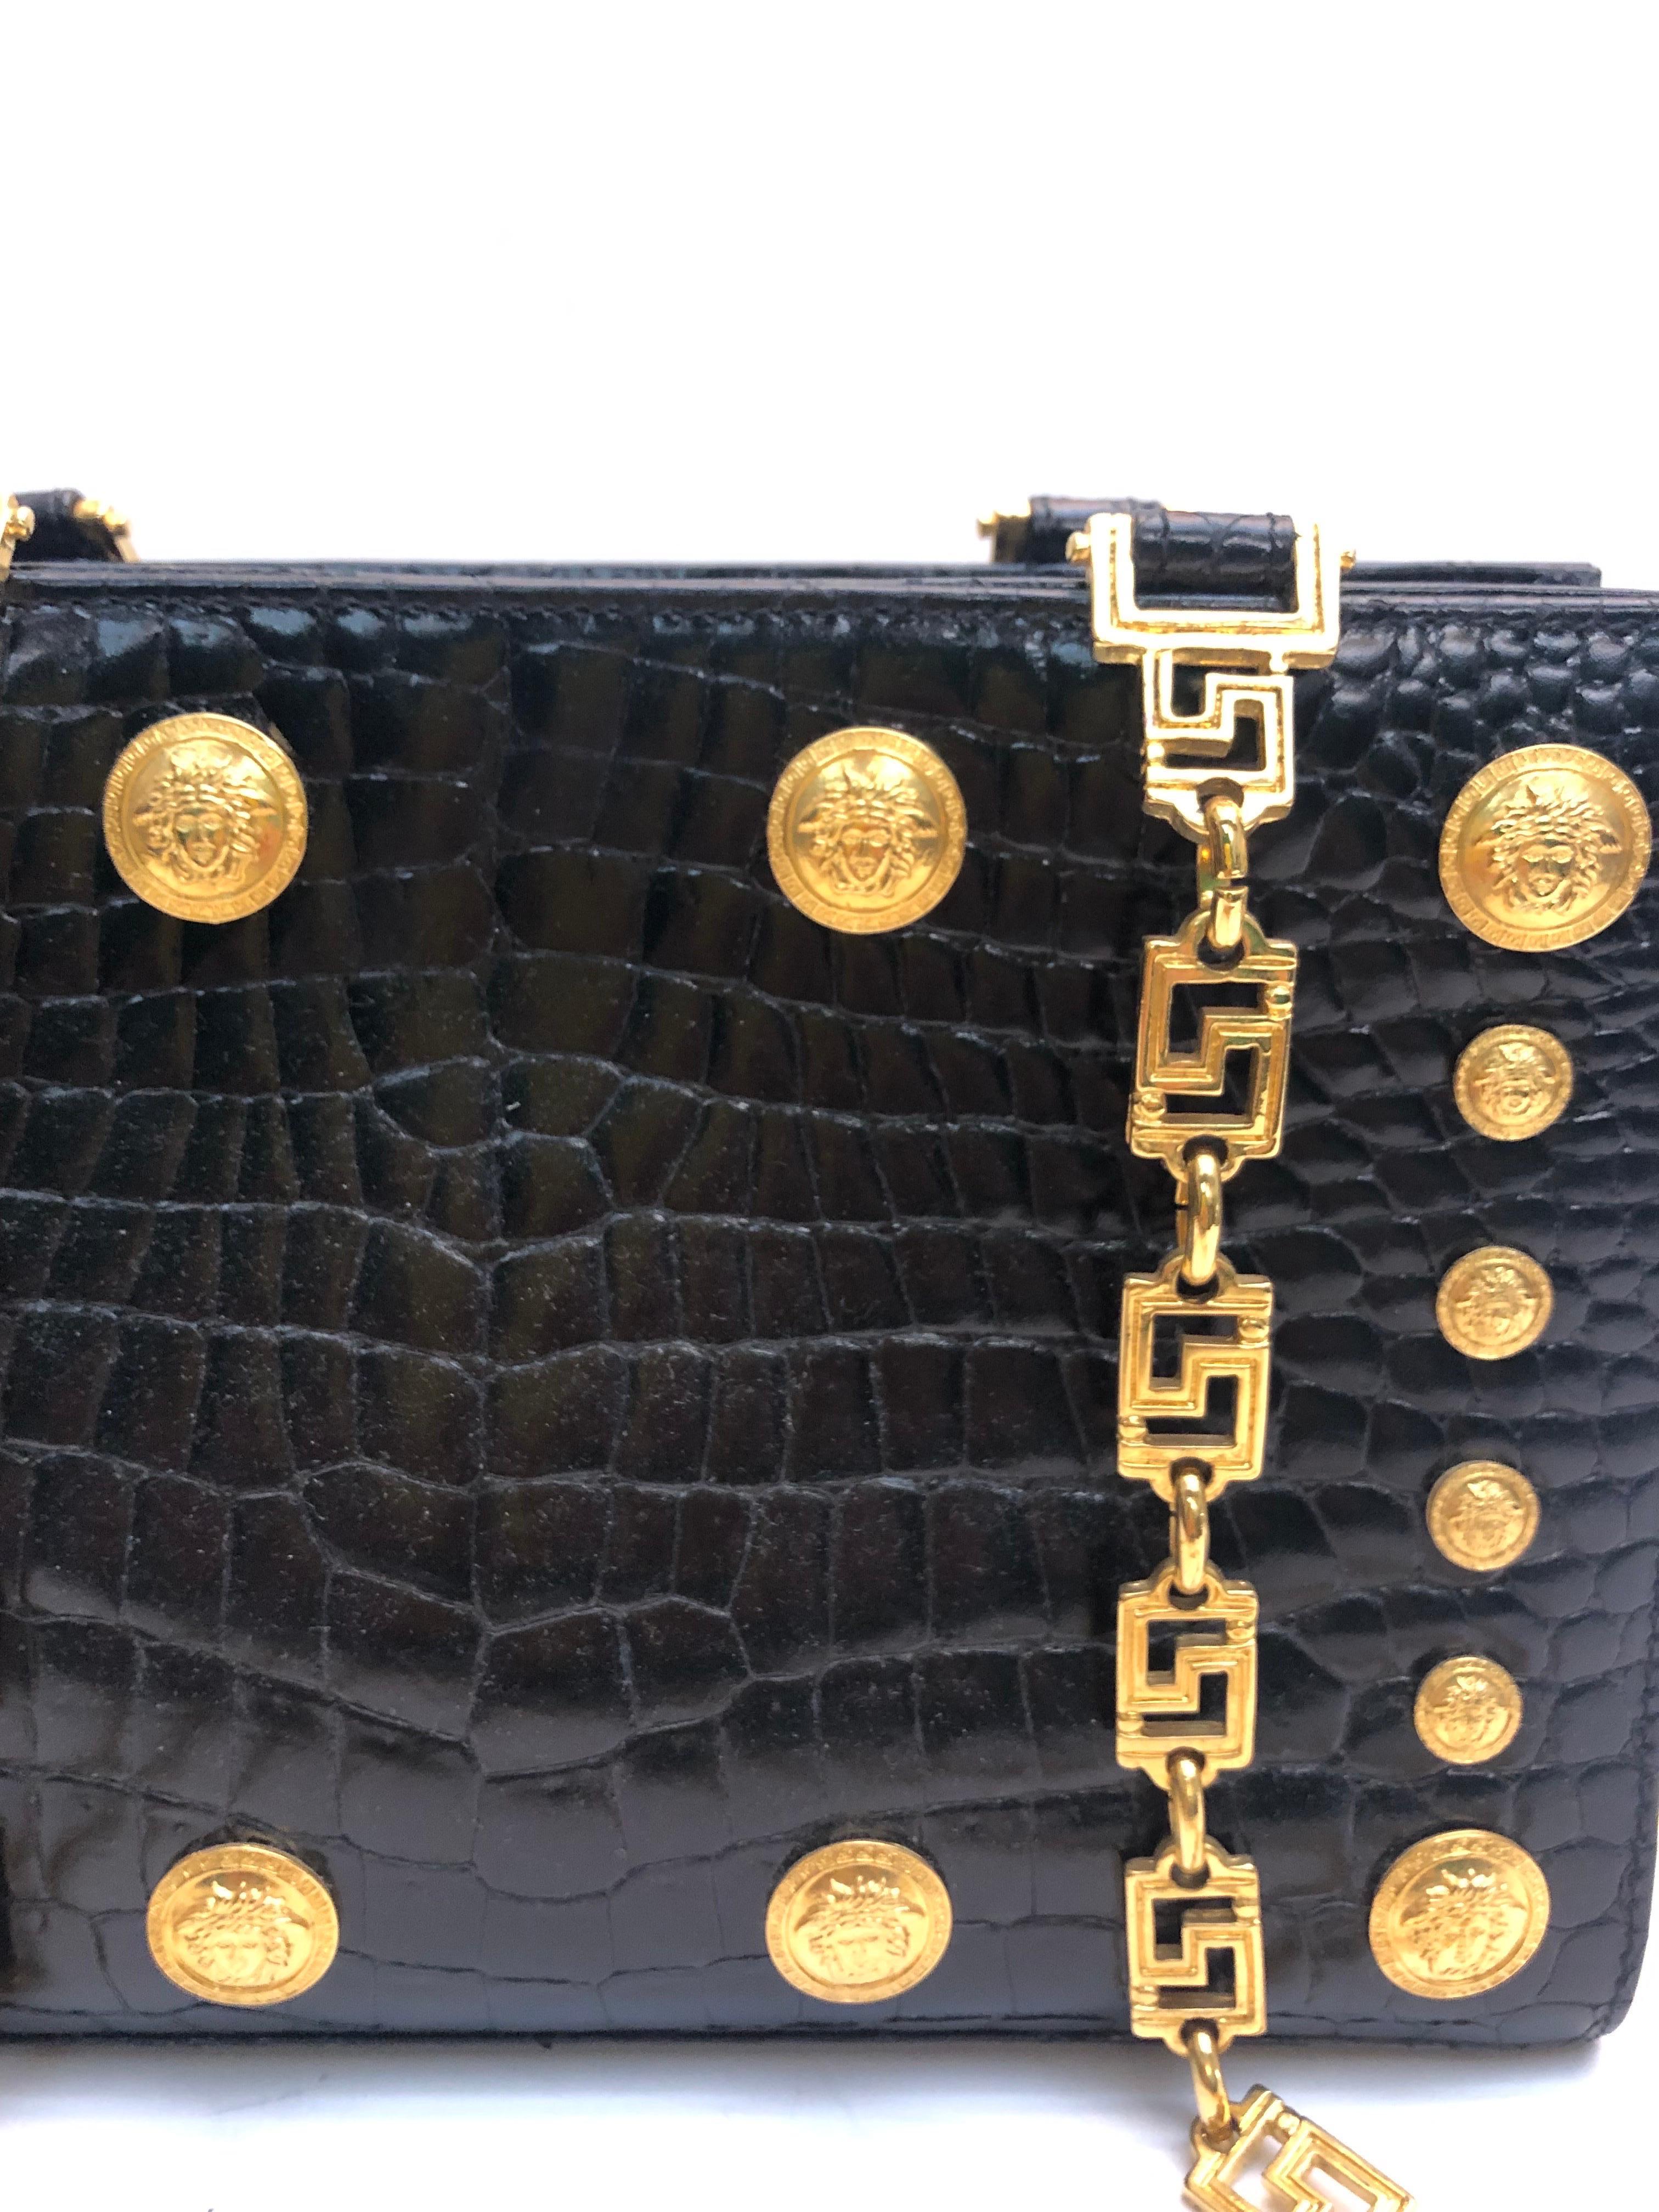 - Vintage 90s Gianni Versace Couture black patent leather with iconic medusa and double chain straps. 

- Interior zip closure. 

- Long: 25cm I Height: 17cm I Width: 8cm I Chain: 44cm.